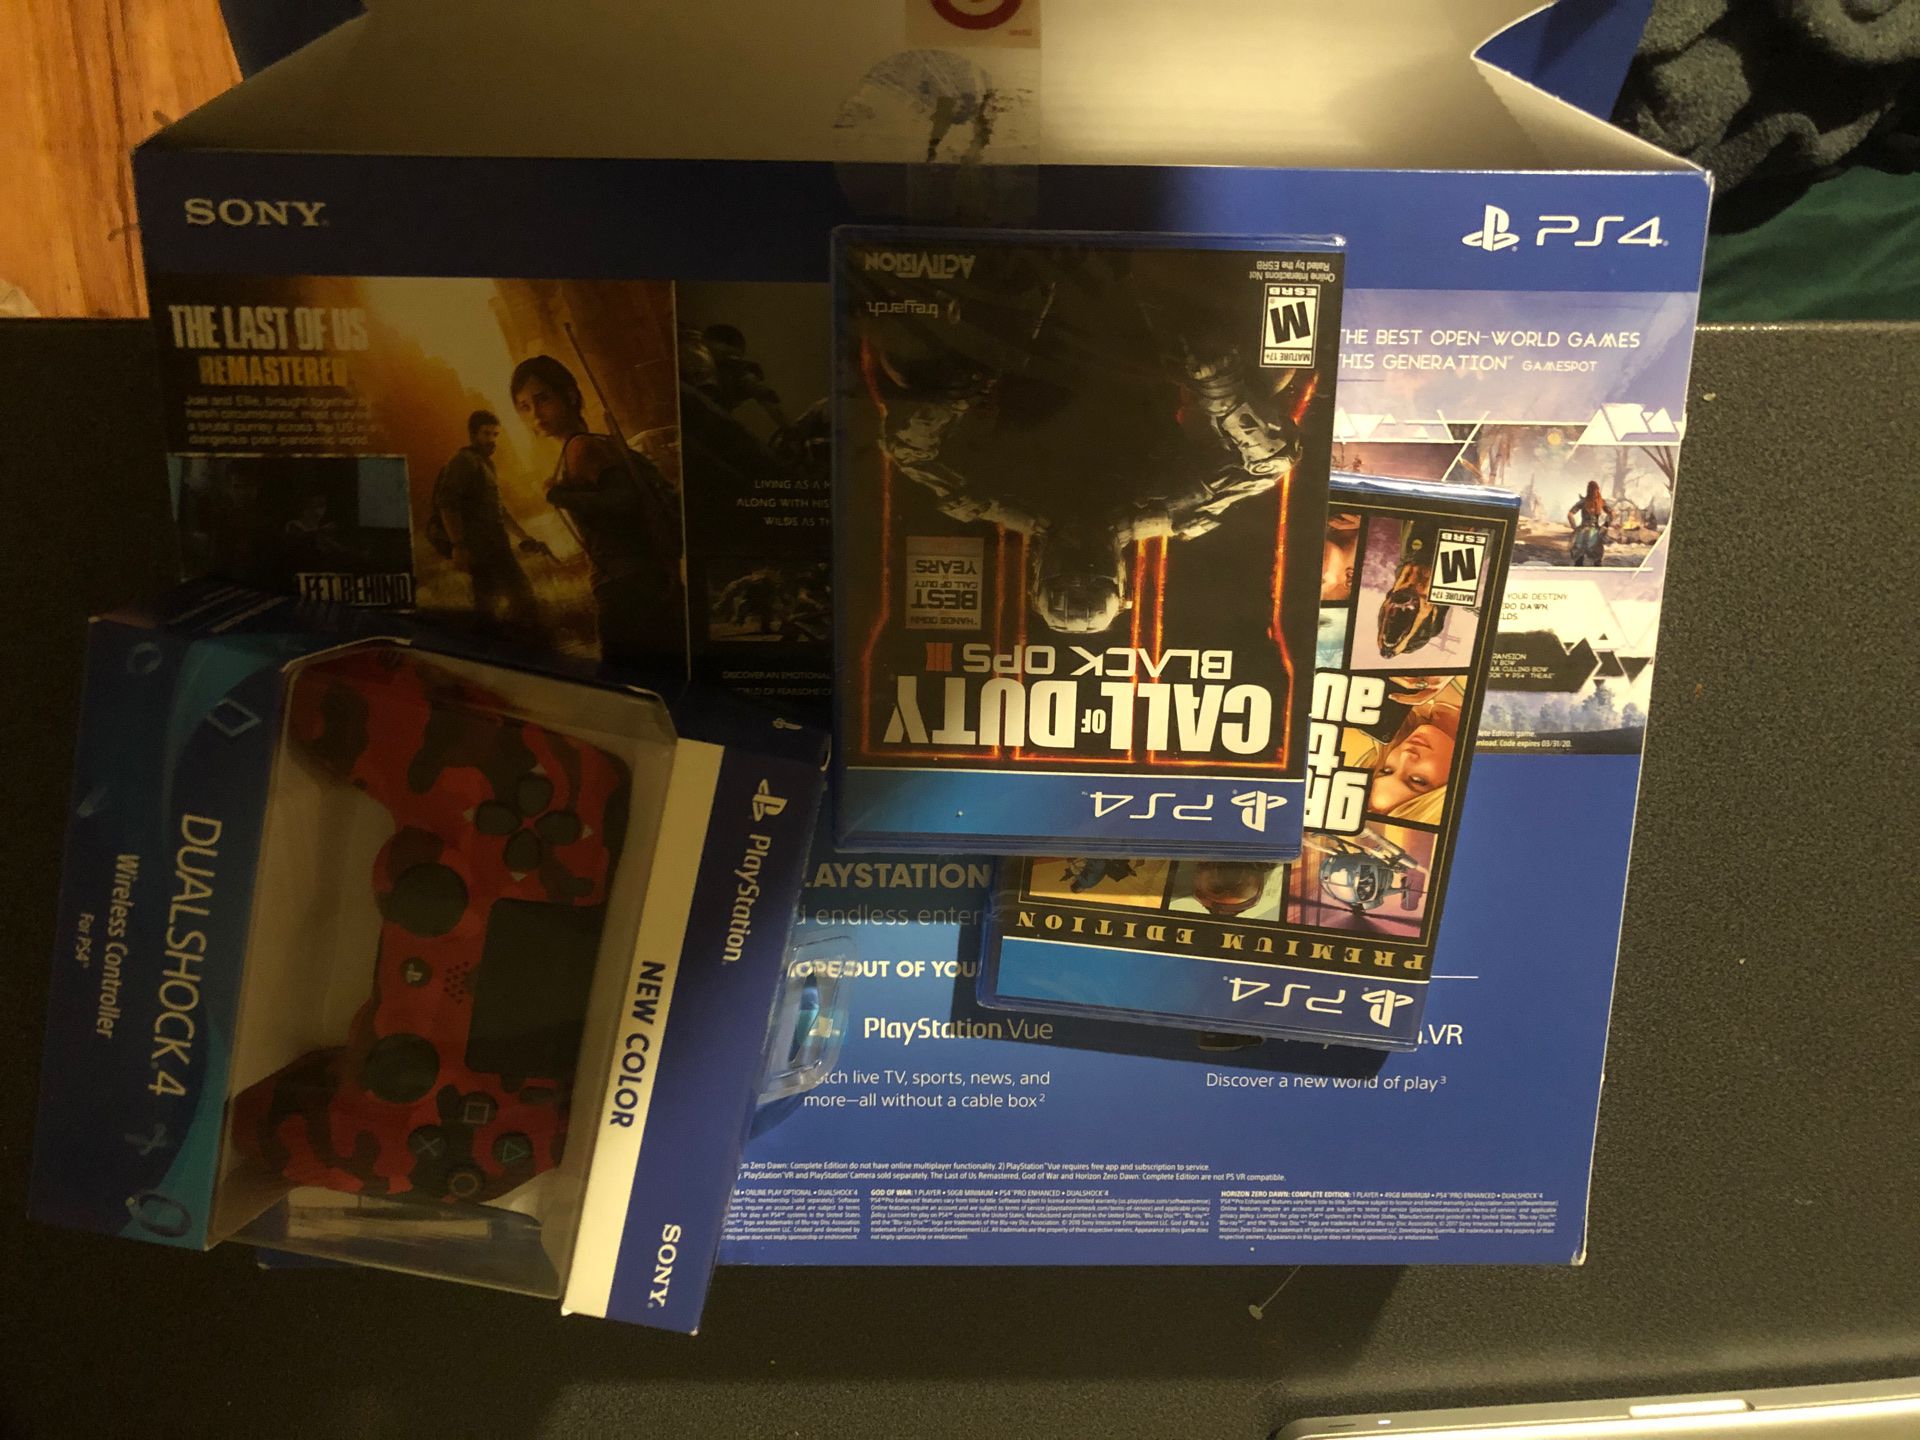 PlayStation 4, wireless controller and games